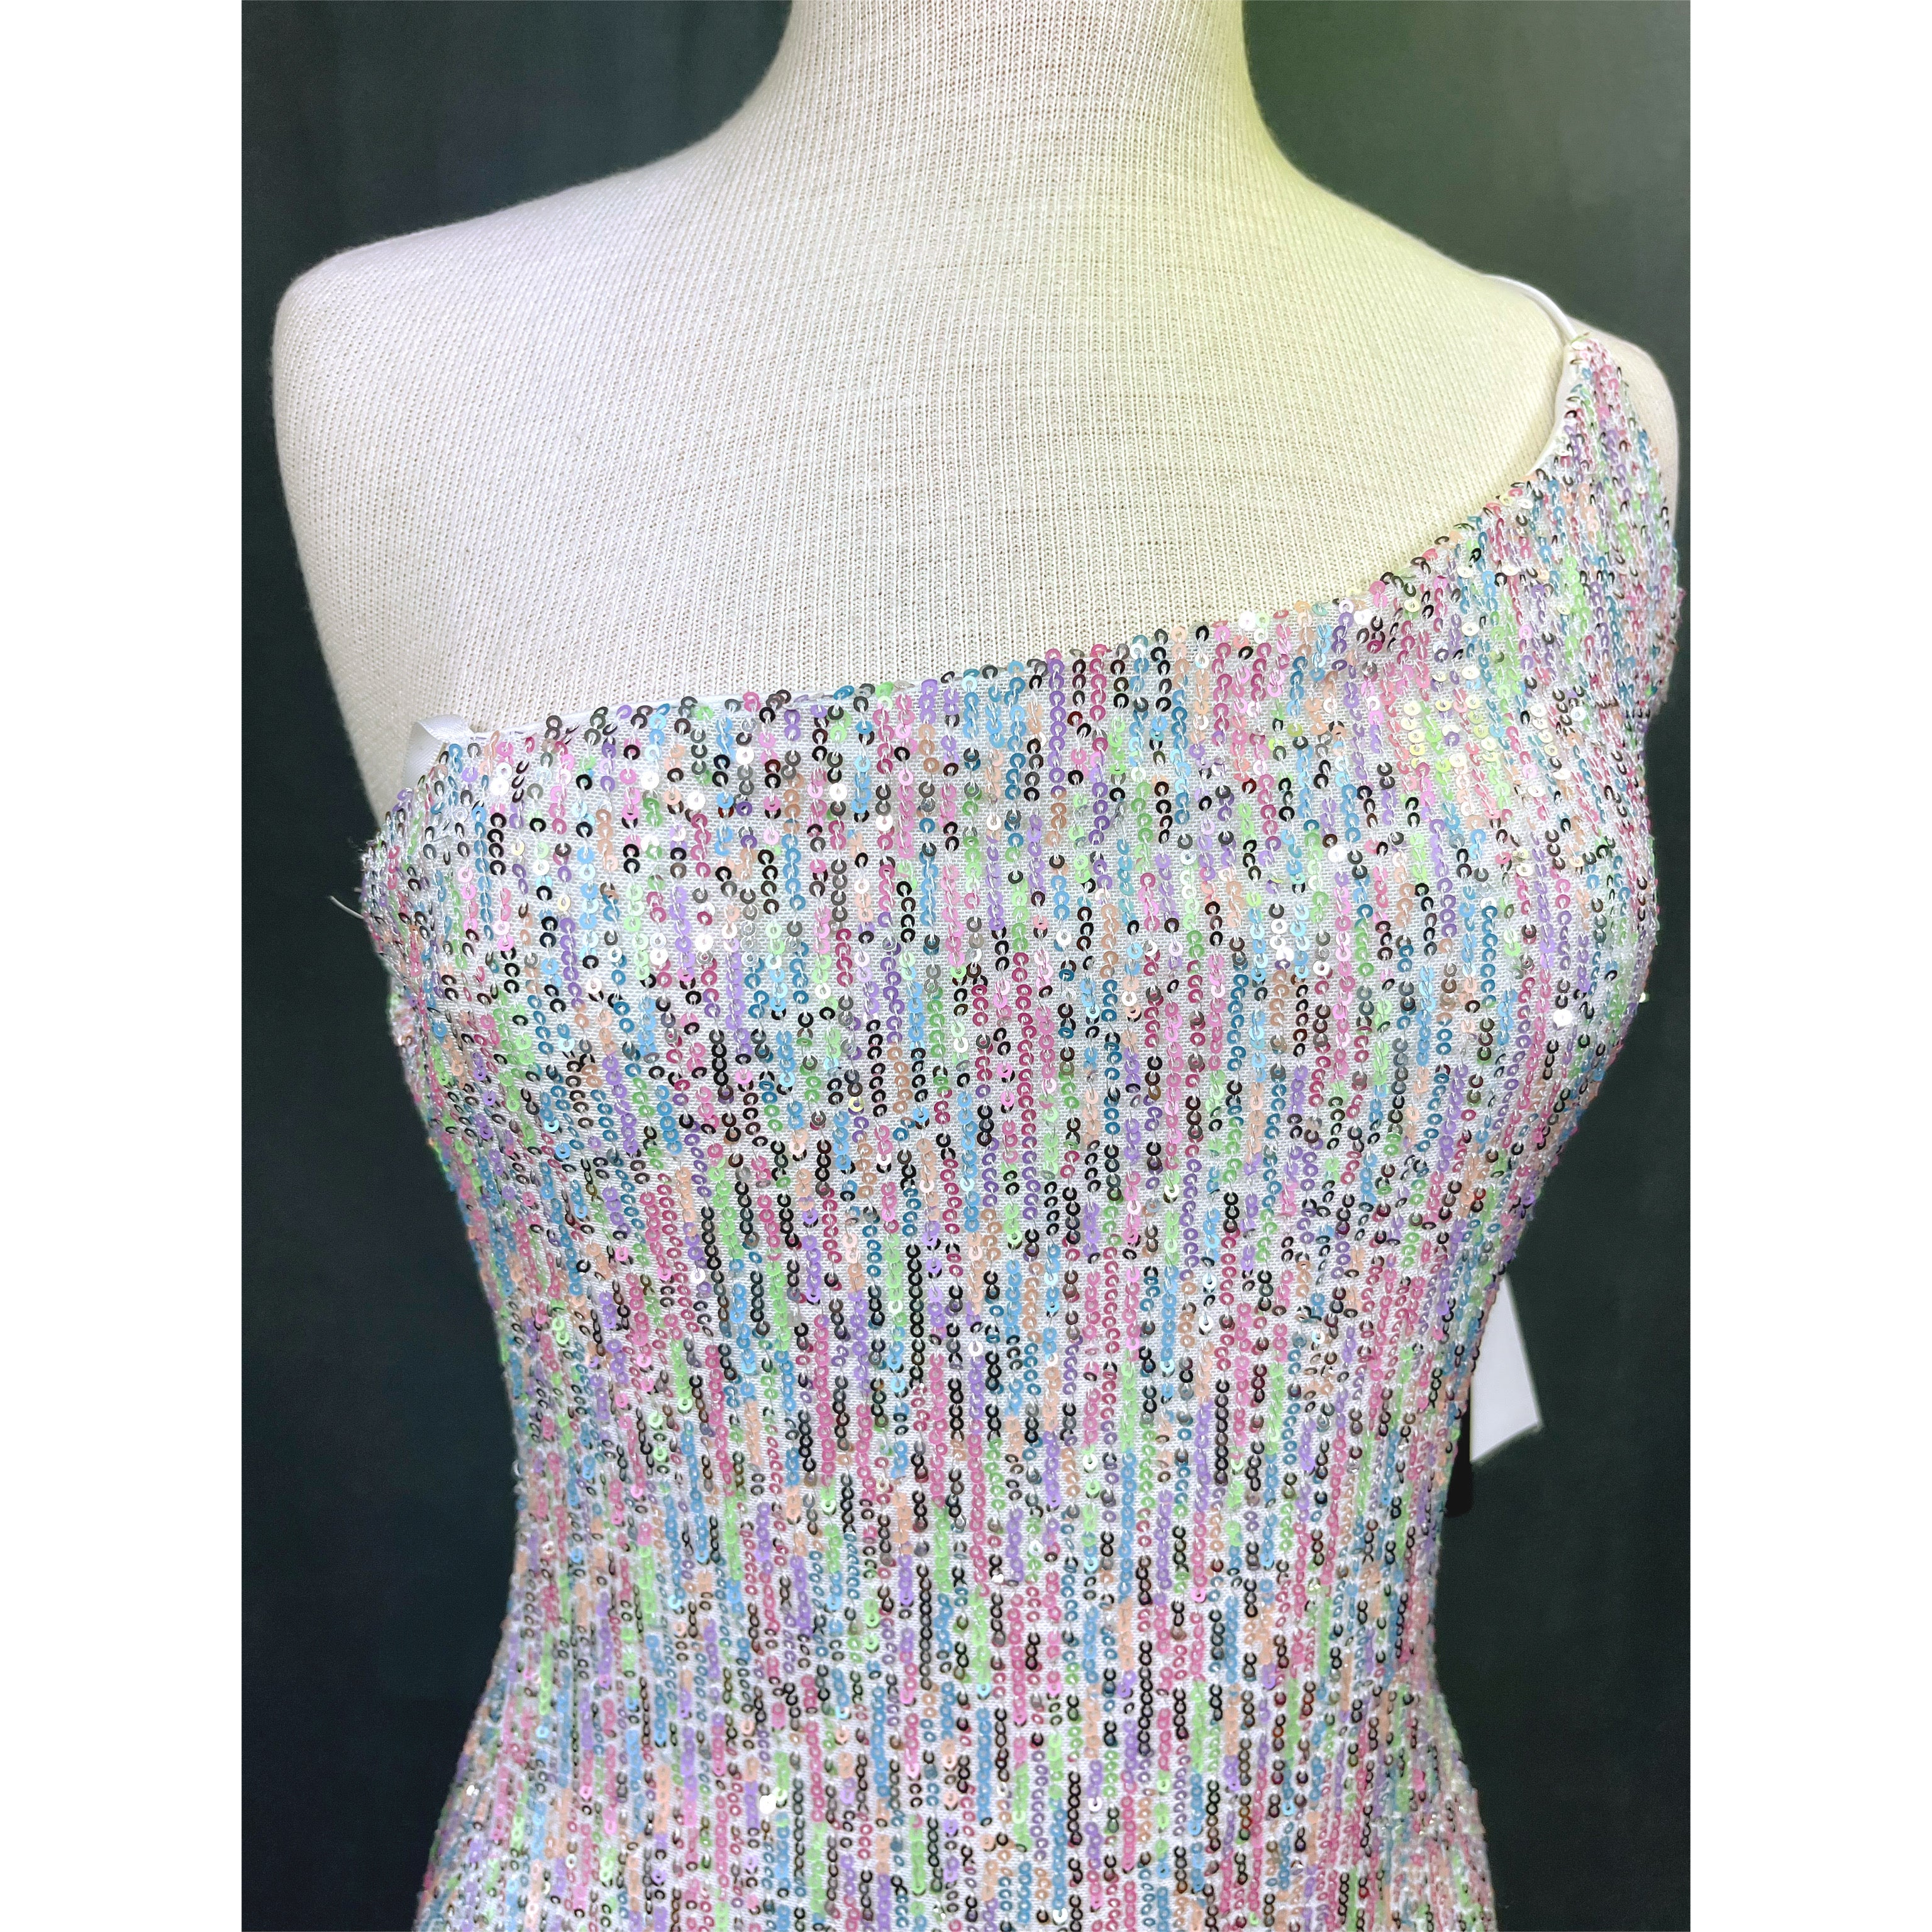 City Vibe white & pastel sequin dress, size XL, NEW WITH TAGS!